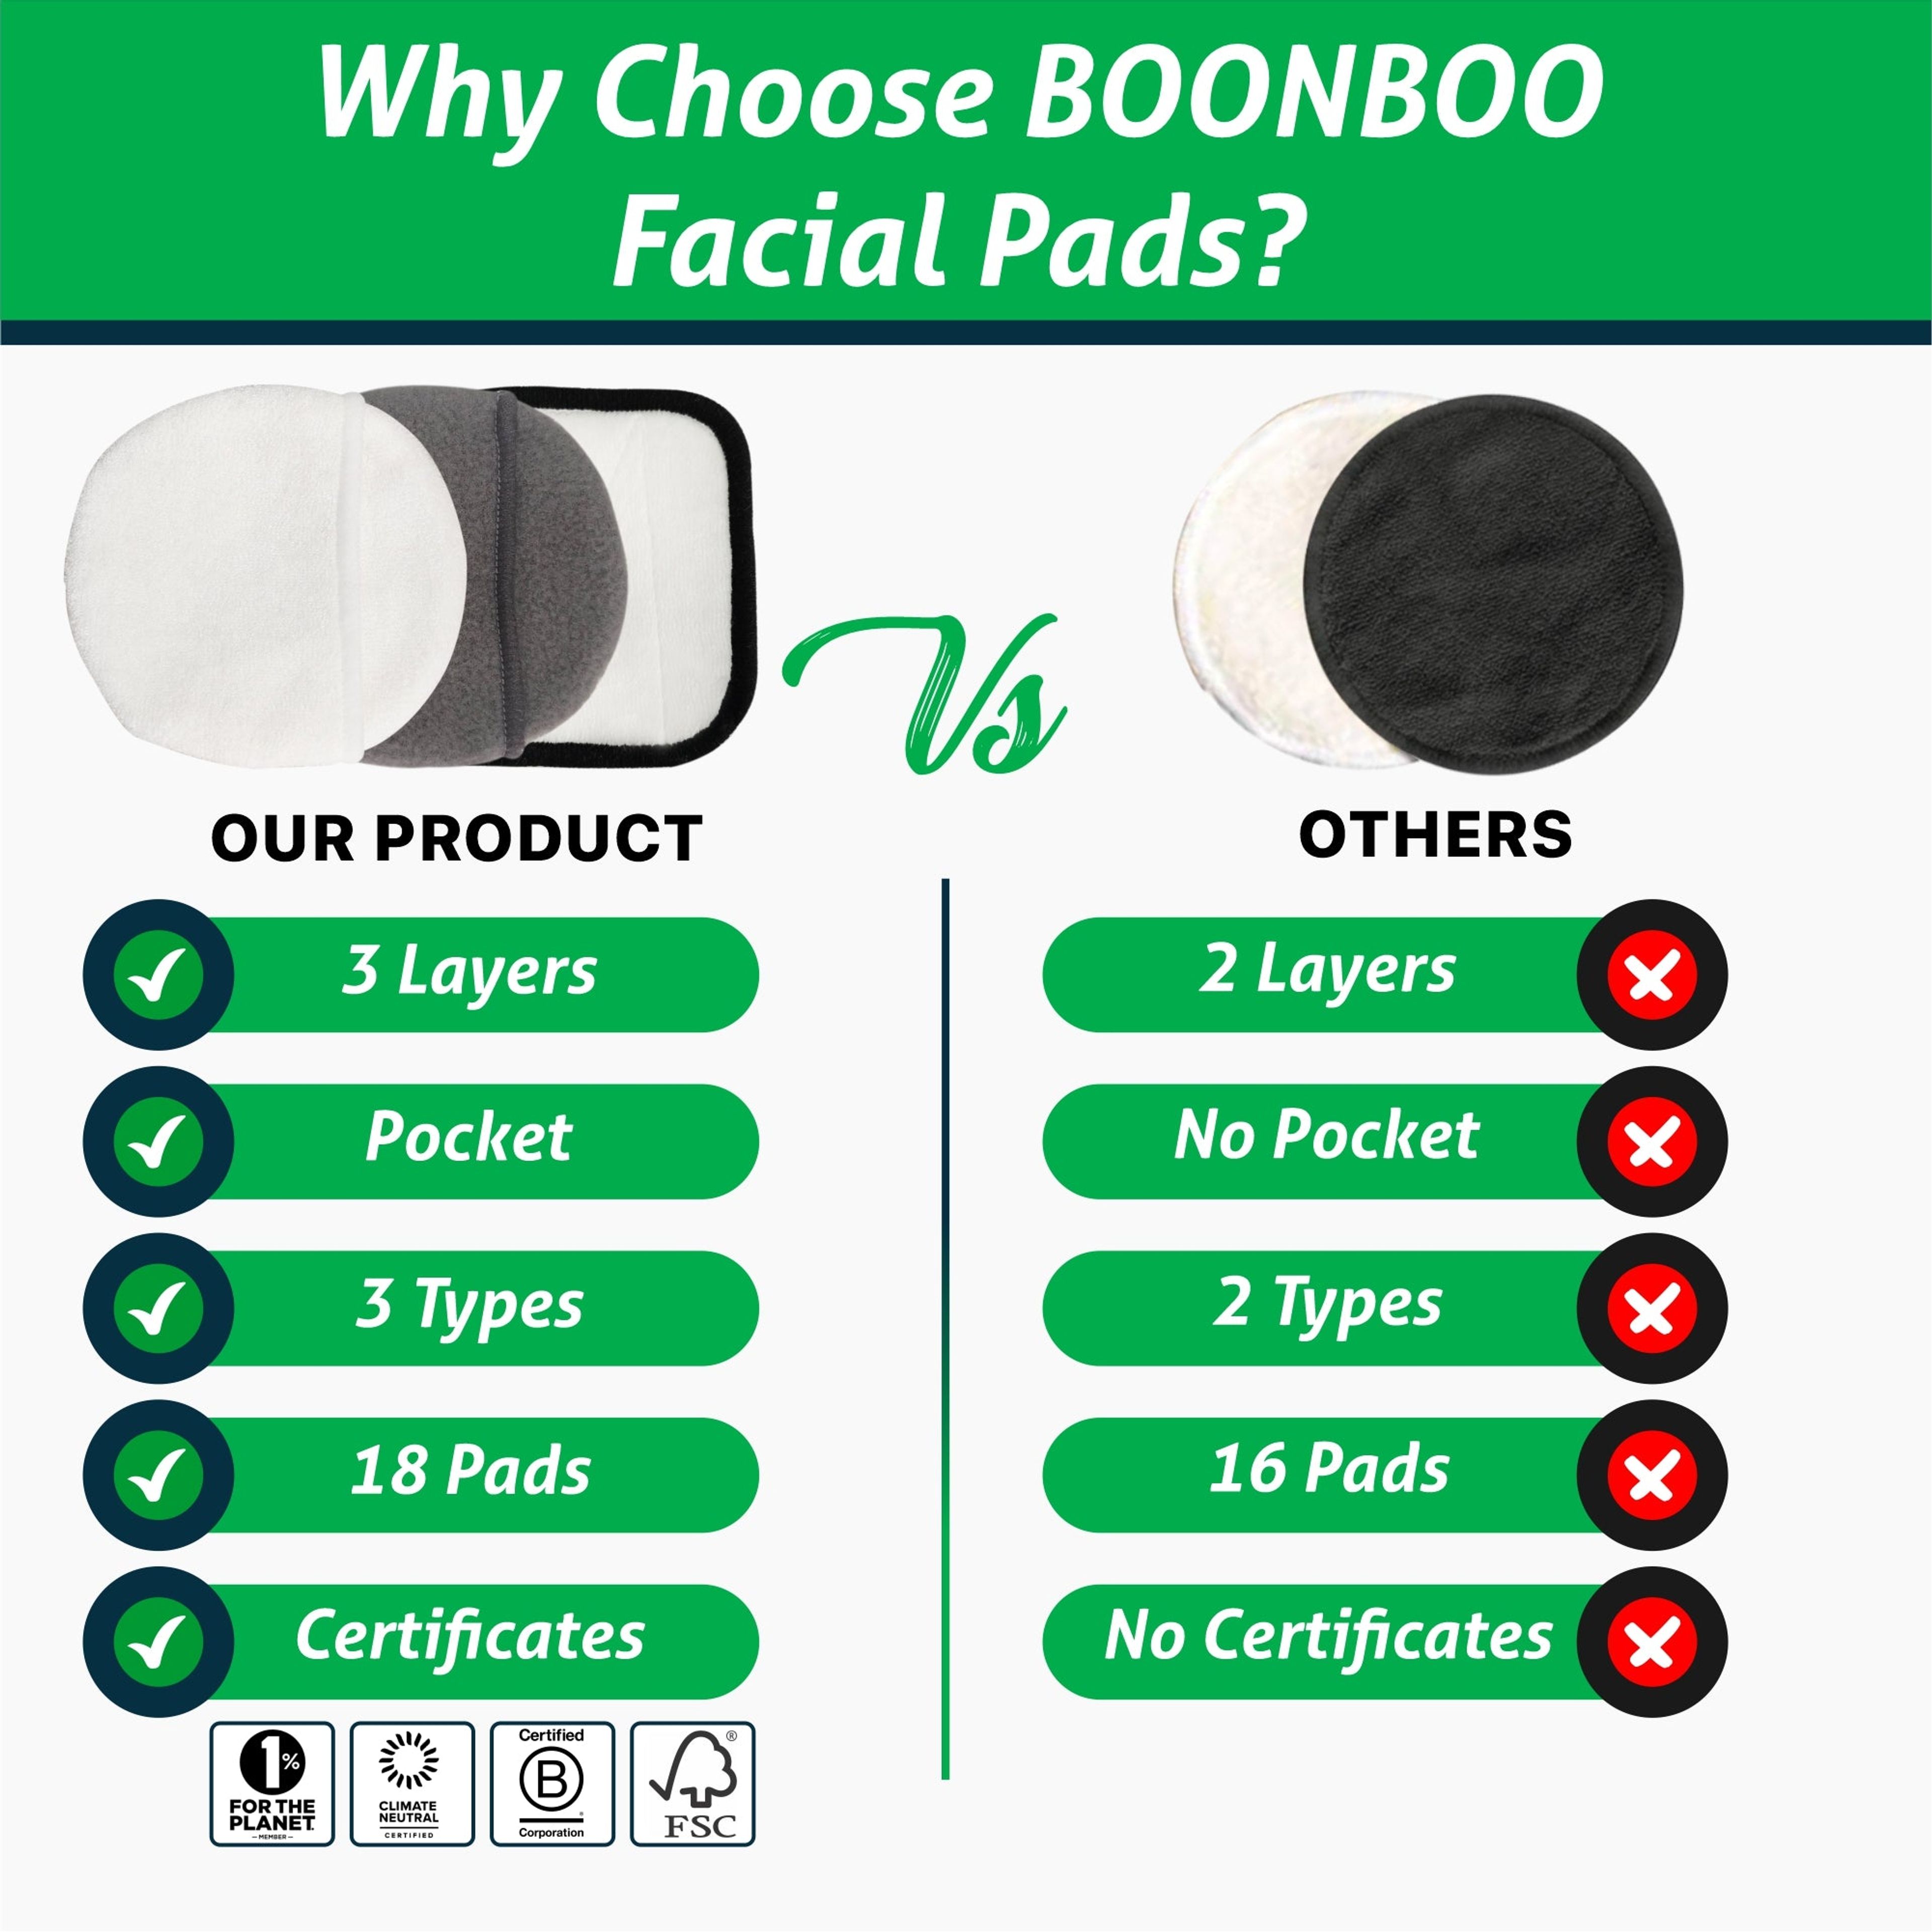 BOONBOO Reusable Make-Up Removal Pads | Facial Rounds for Makeup Removal | 18 Pads + Laundry Bag | Bamboo and Cotton Fiber | Sustainable & Biodegradable | Plastic-Free